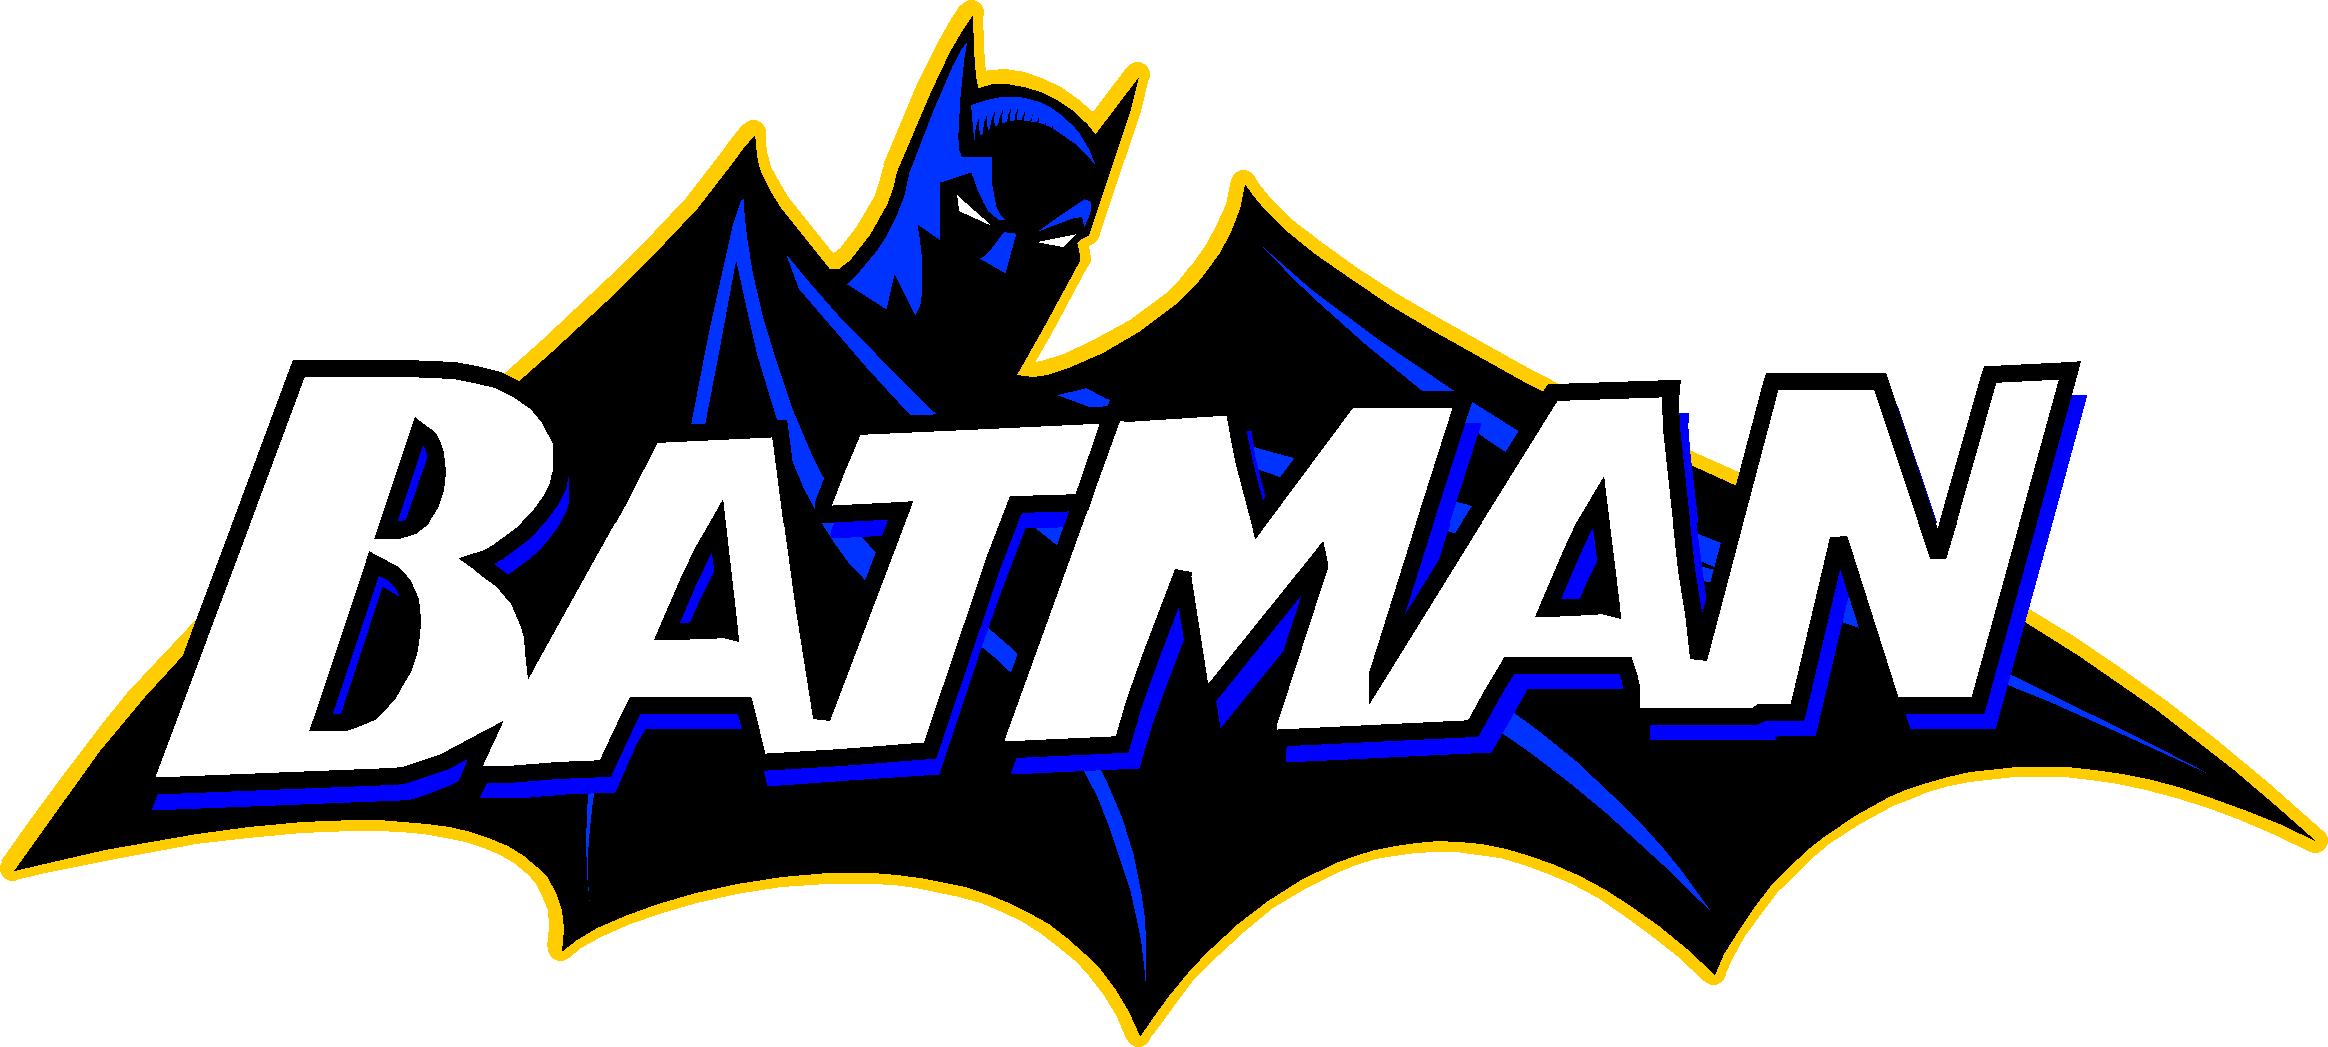 There Is 55 Dark Knight Logo   Free Cliparts All Used For Free 